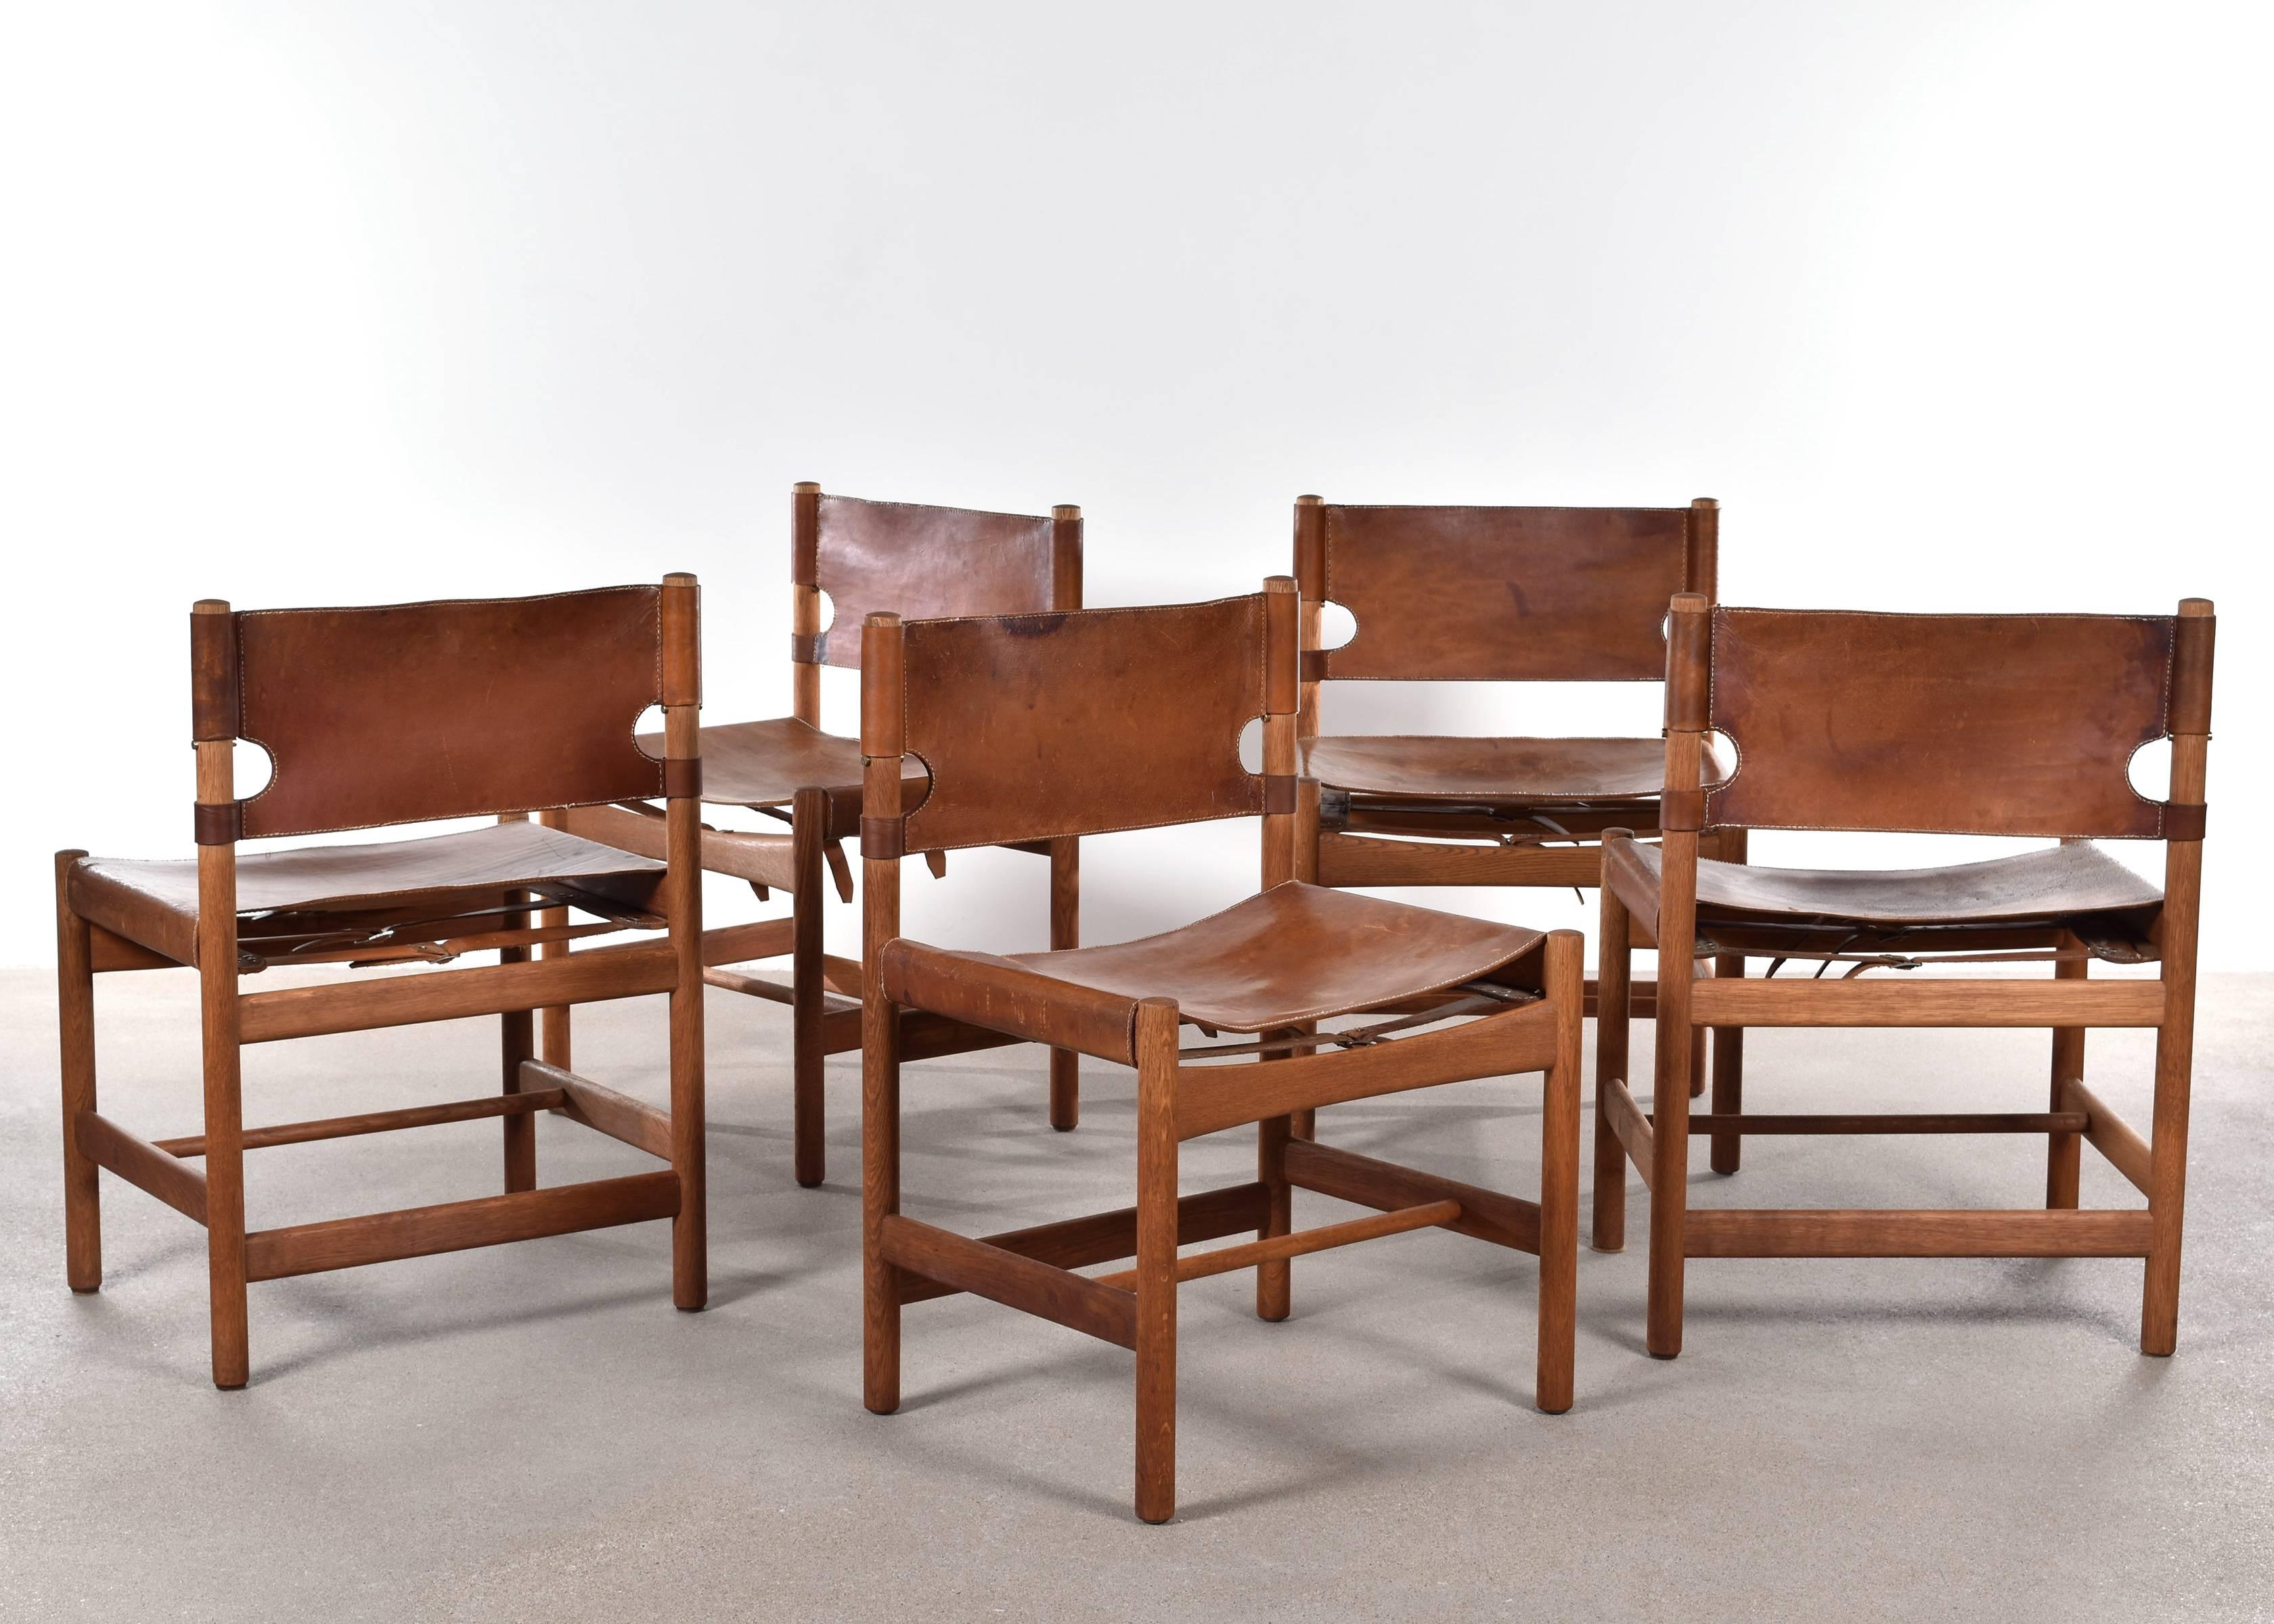 Nice set of (light) restored Børge Mogensen 'Hunting' chairs model no. 3251 for Fredericia Furniture. Oak frames with saddle leather all with very nice patina.
Please note: pictured are 5 chairs, but 4 chairs are sold.

Free shipping for European